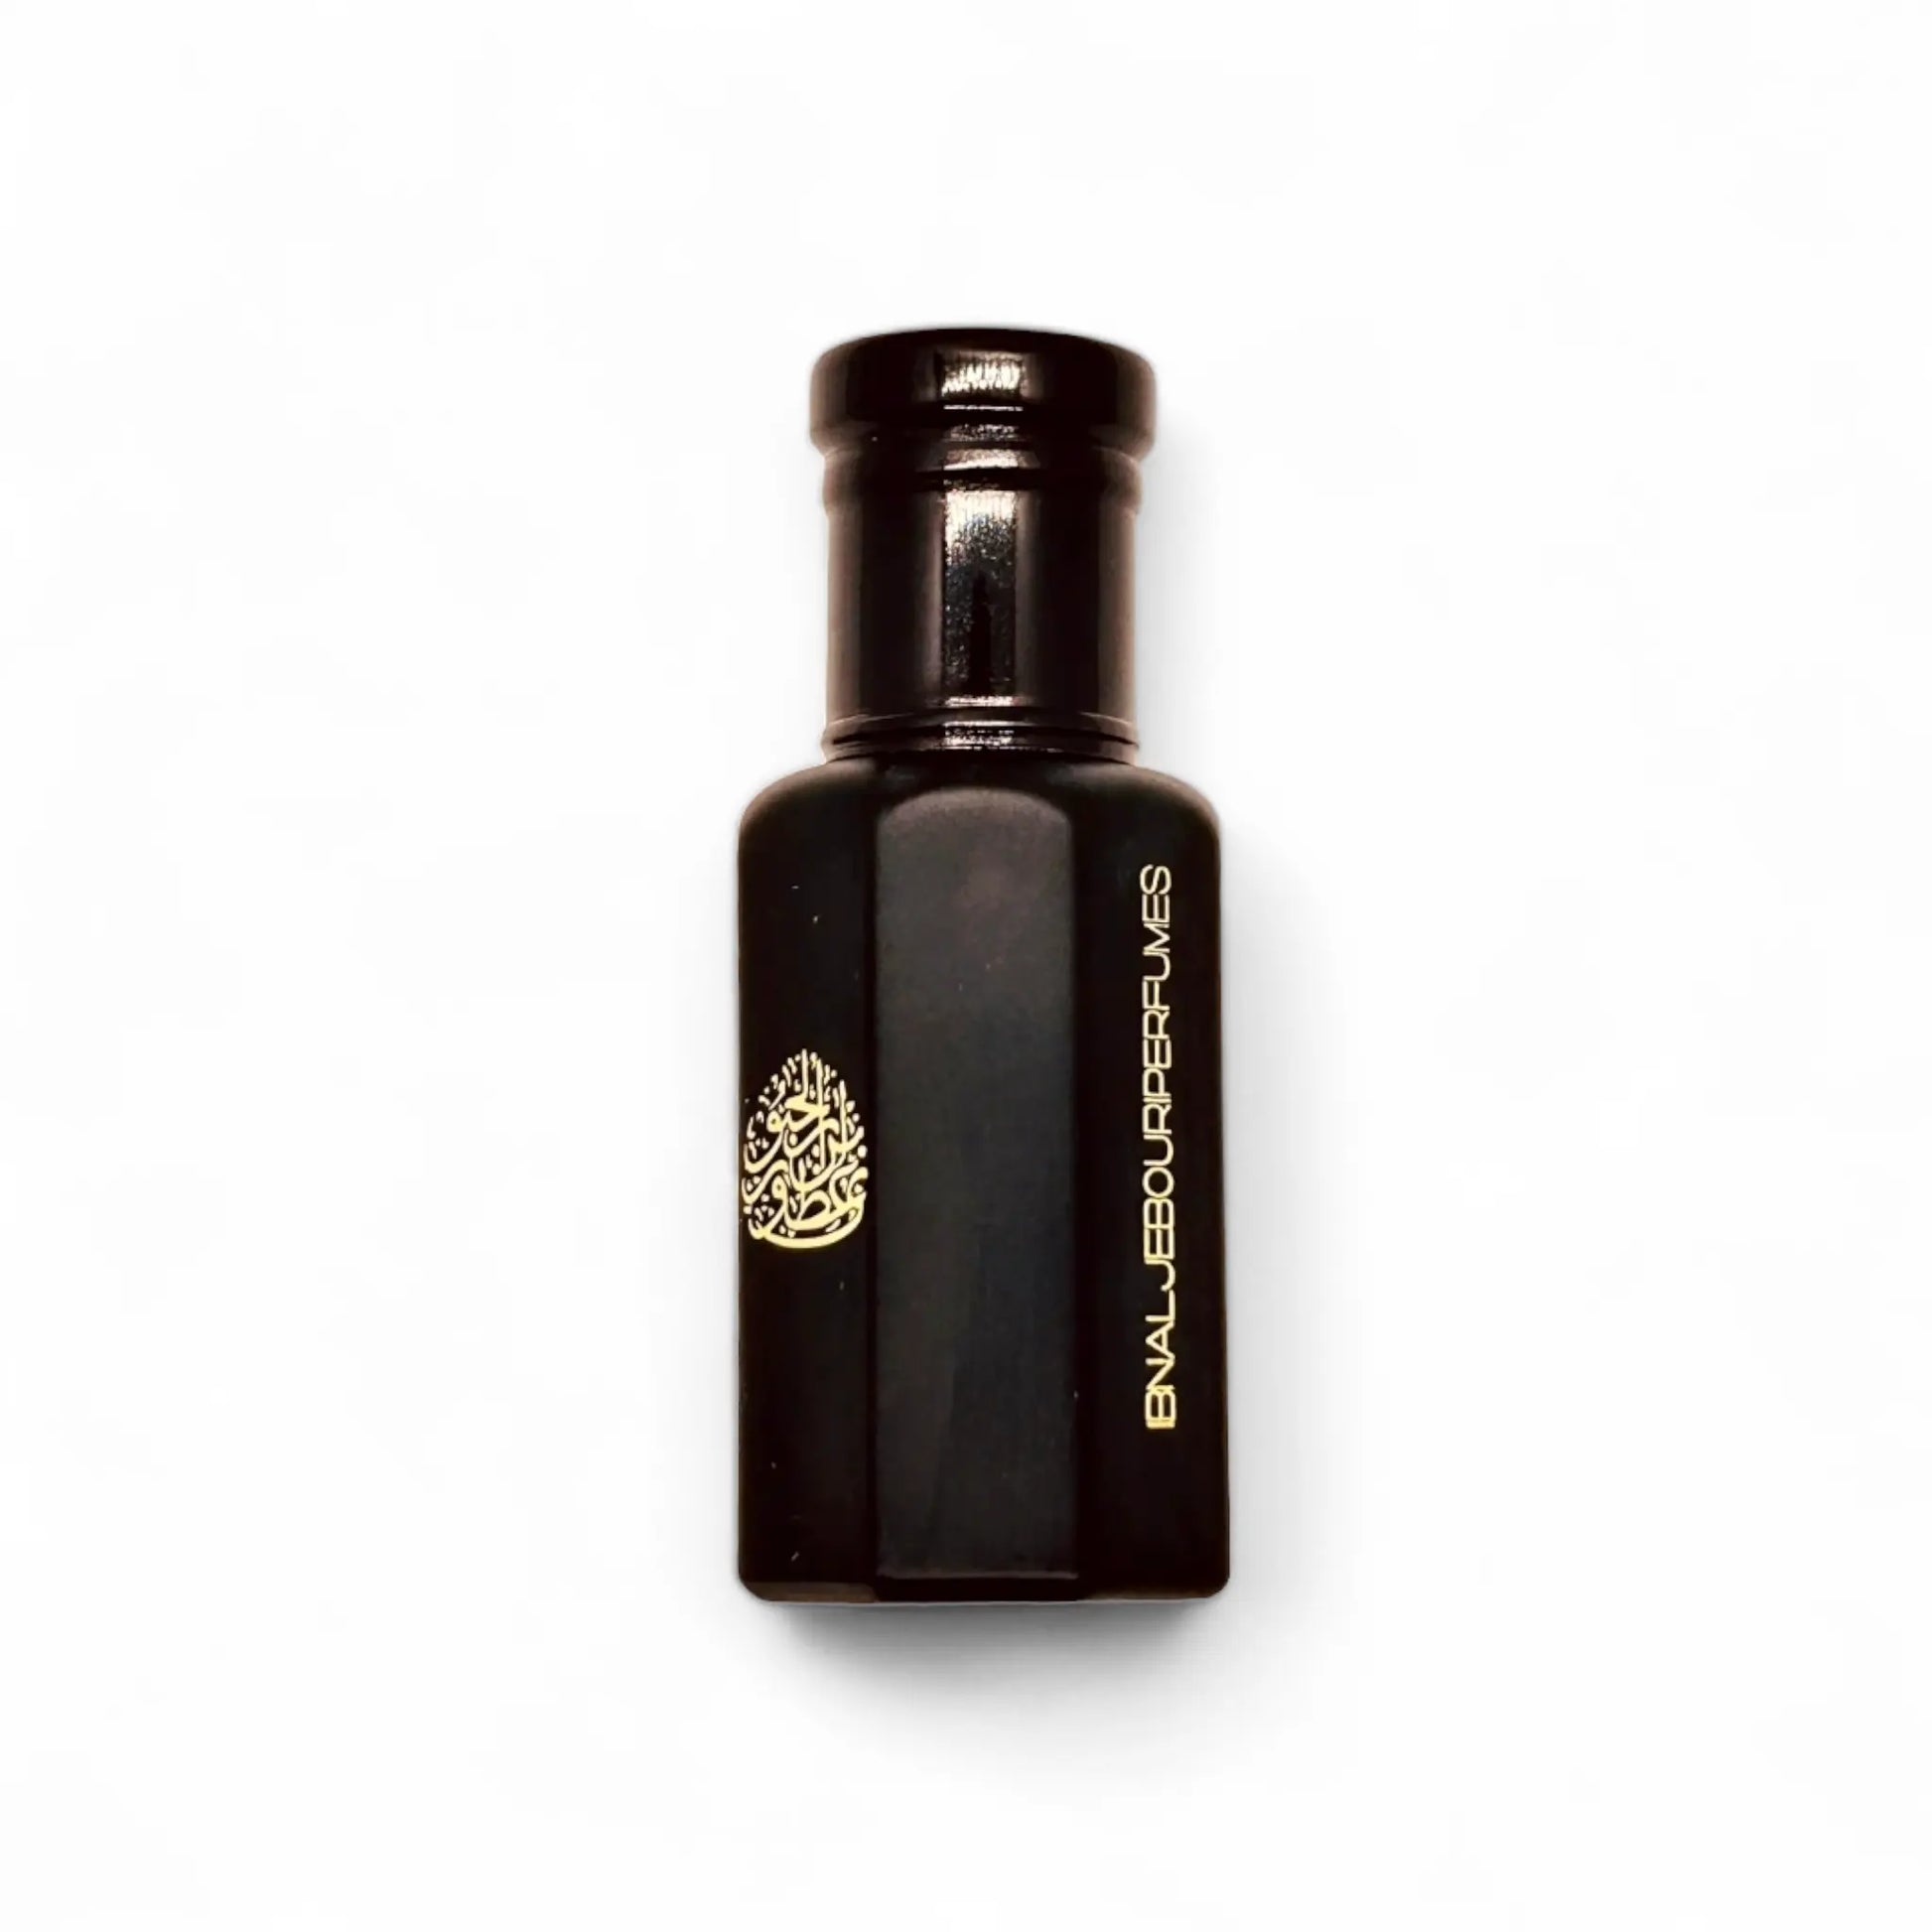 Lumiere d'Orient Perfume oil by Ibn Al Jebouri Perfume - Floral Sweet Fragrance for Women 